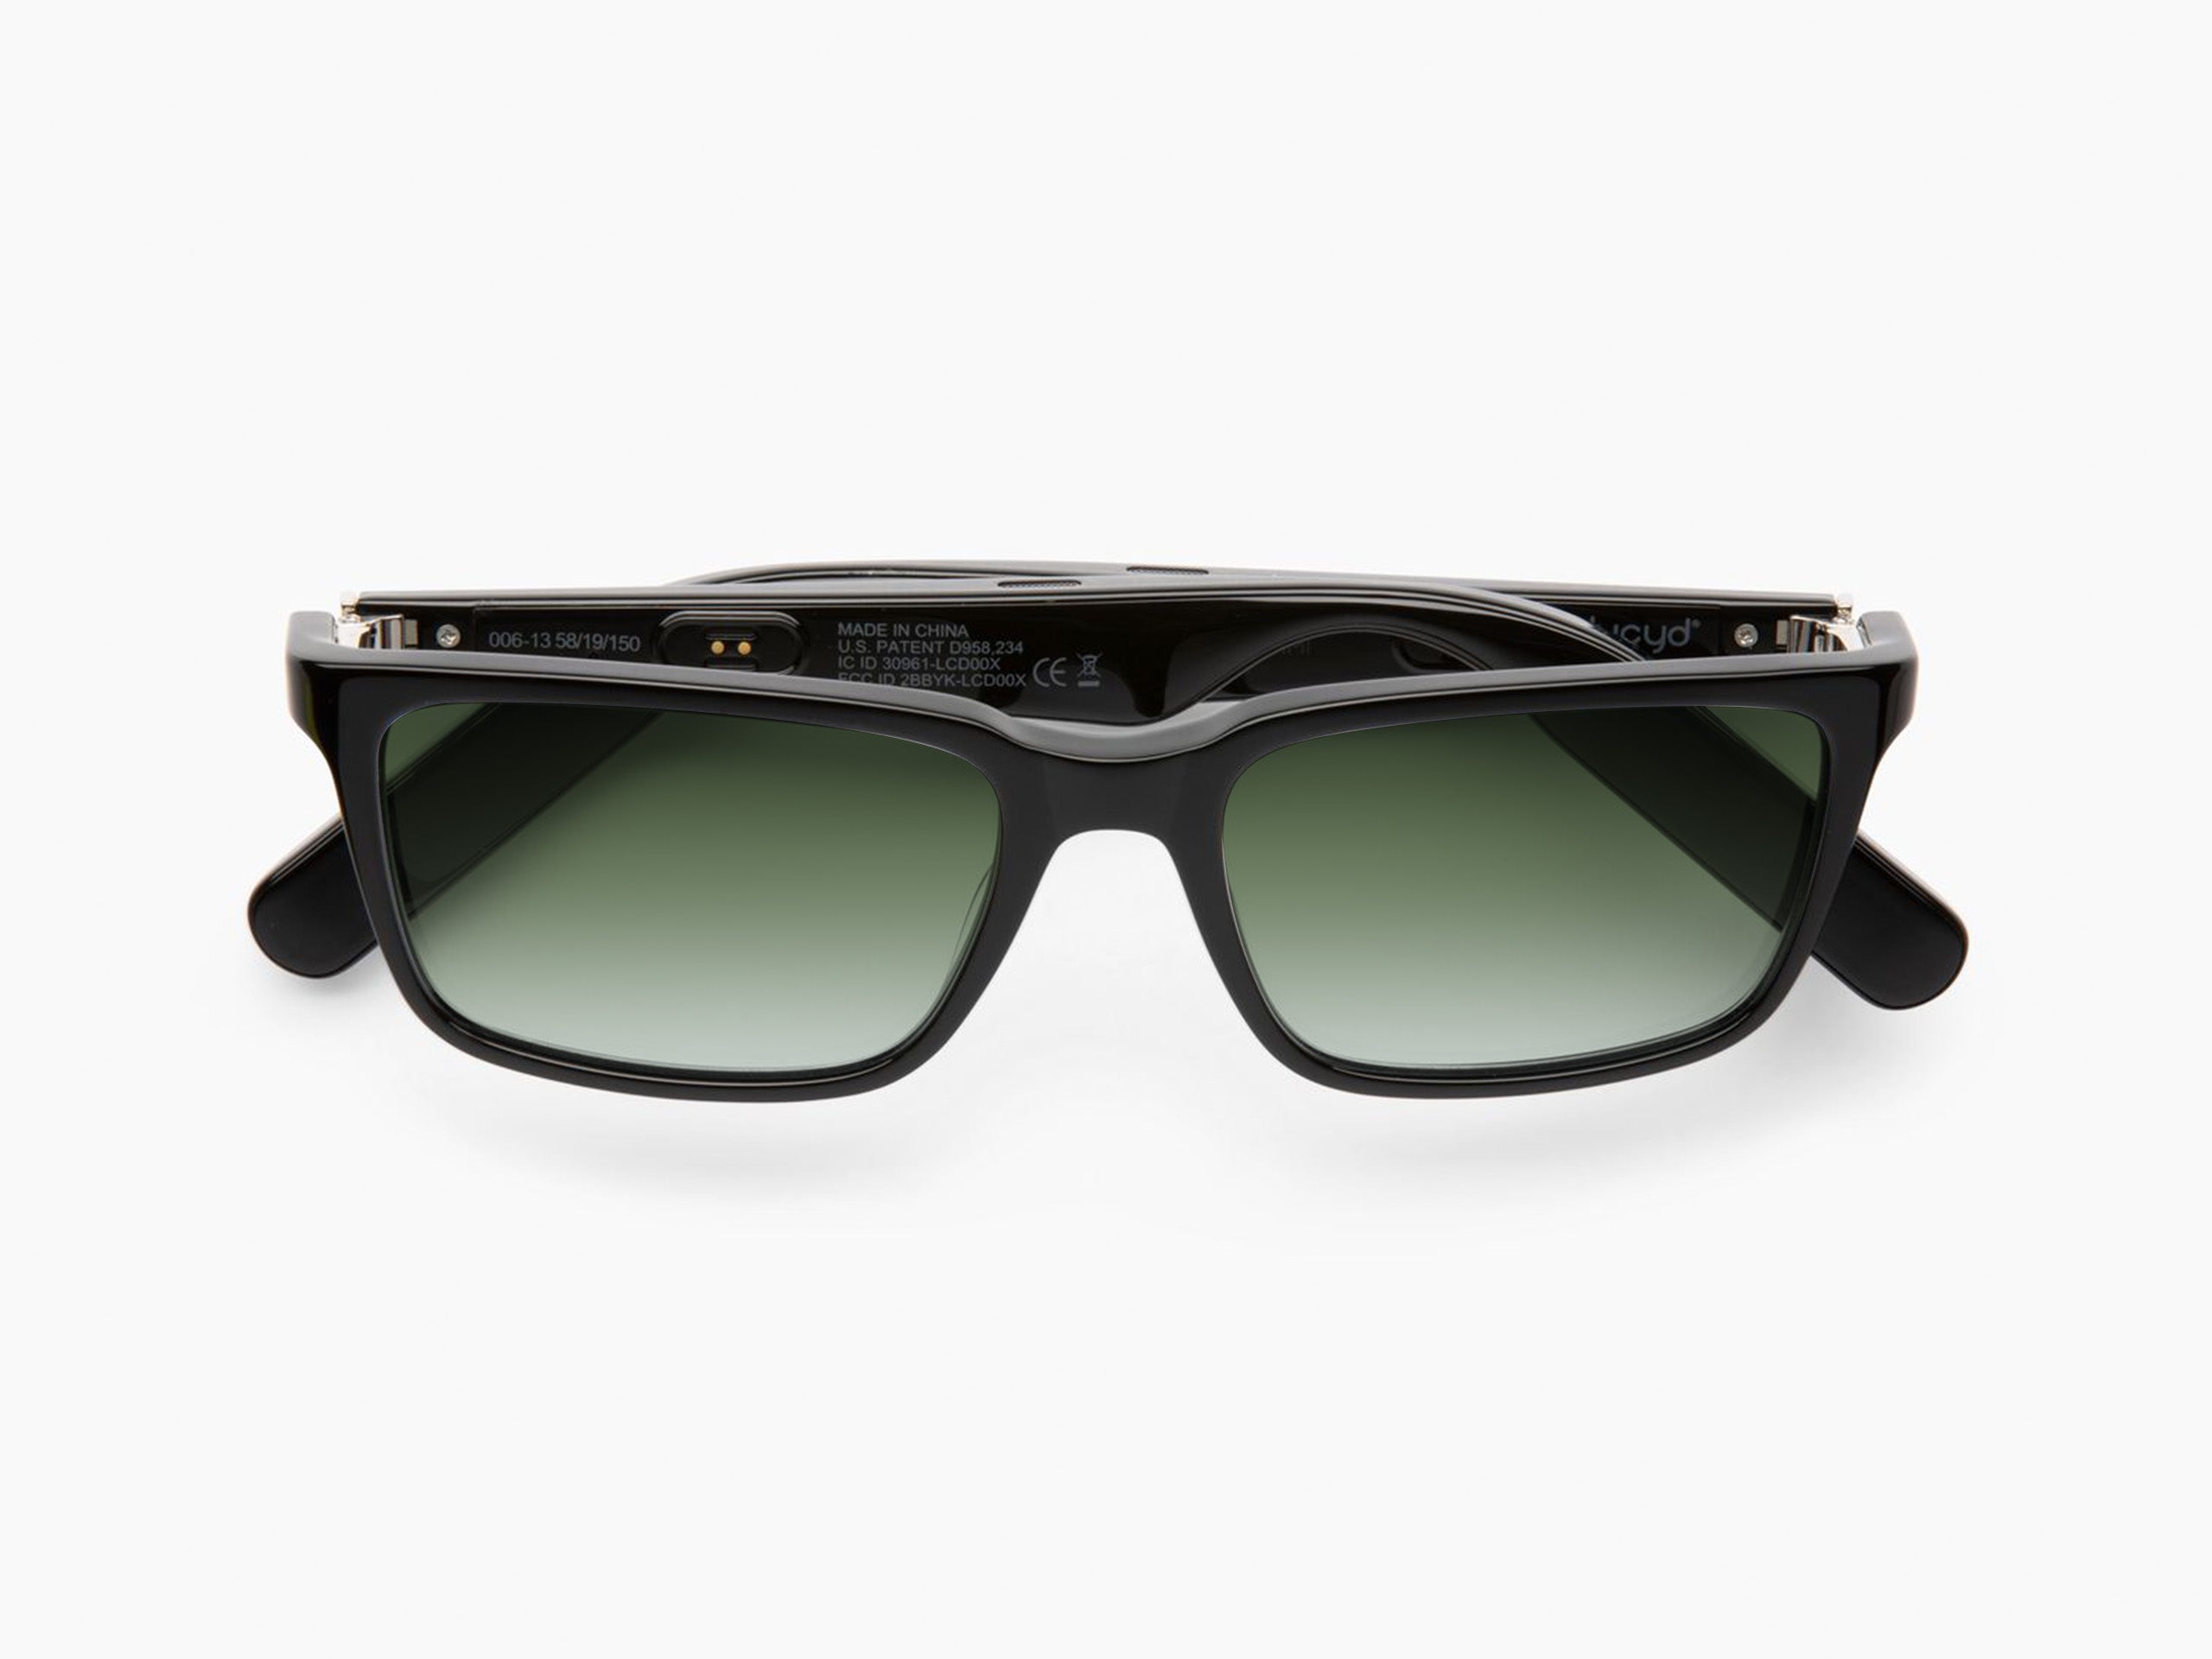 Louis Vuitton Sunglasses V In Middle Netherlands, SAVE 47